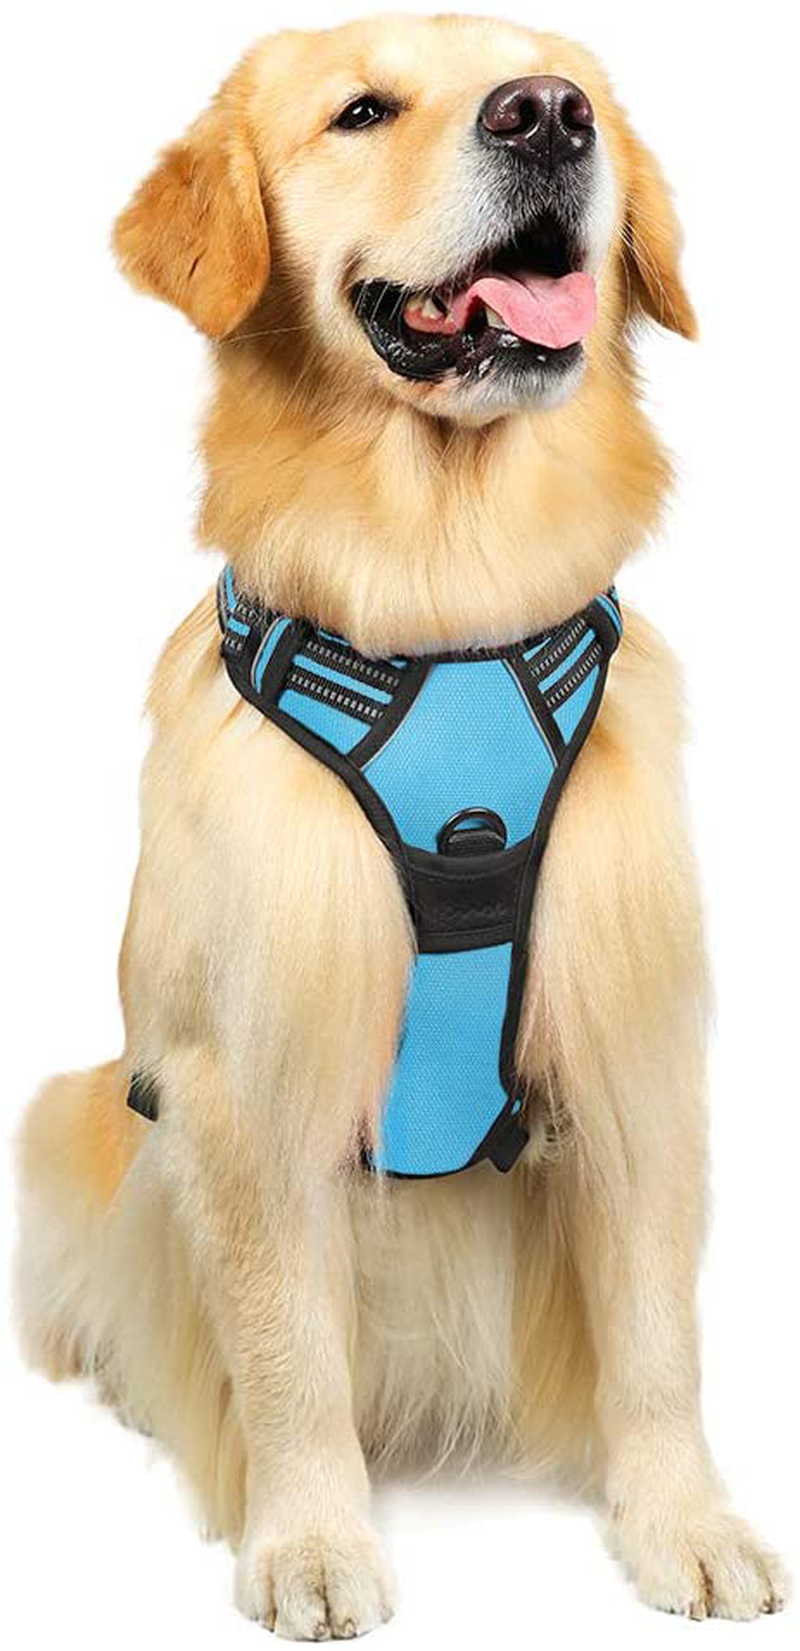 rabbitgoo Dog Harness, No-Pull Pet Harness with 2 Leash Clips, Adjustable Soft Padded Dog Vest, Reflective No-Choke Pet Oxford Vest with Easy Control Handle for Large Dogs, Black, XL  rabbitgoo Baby Blue Large 